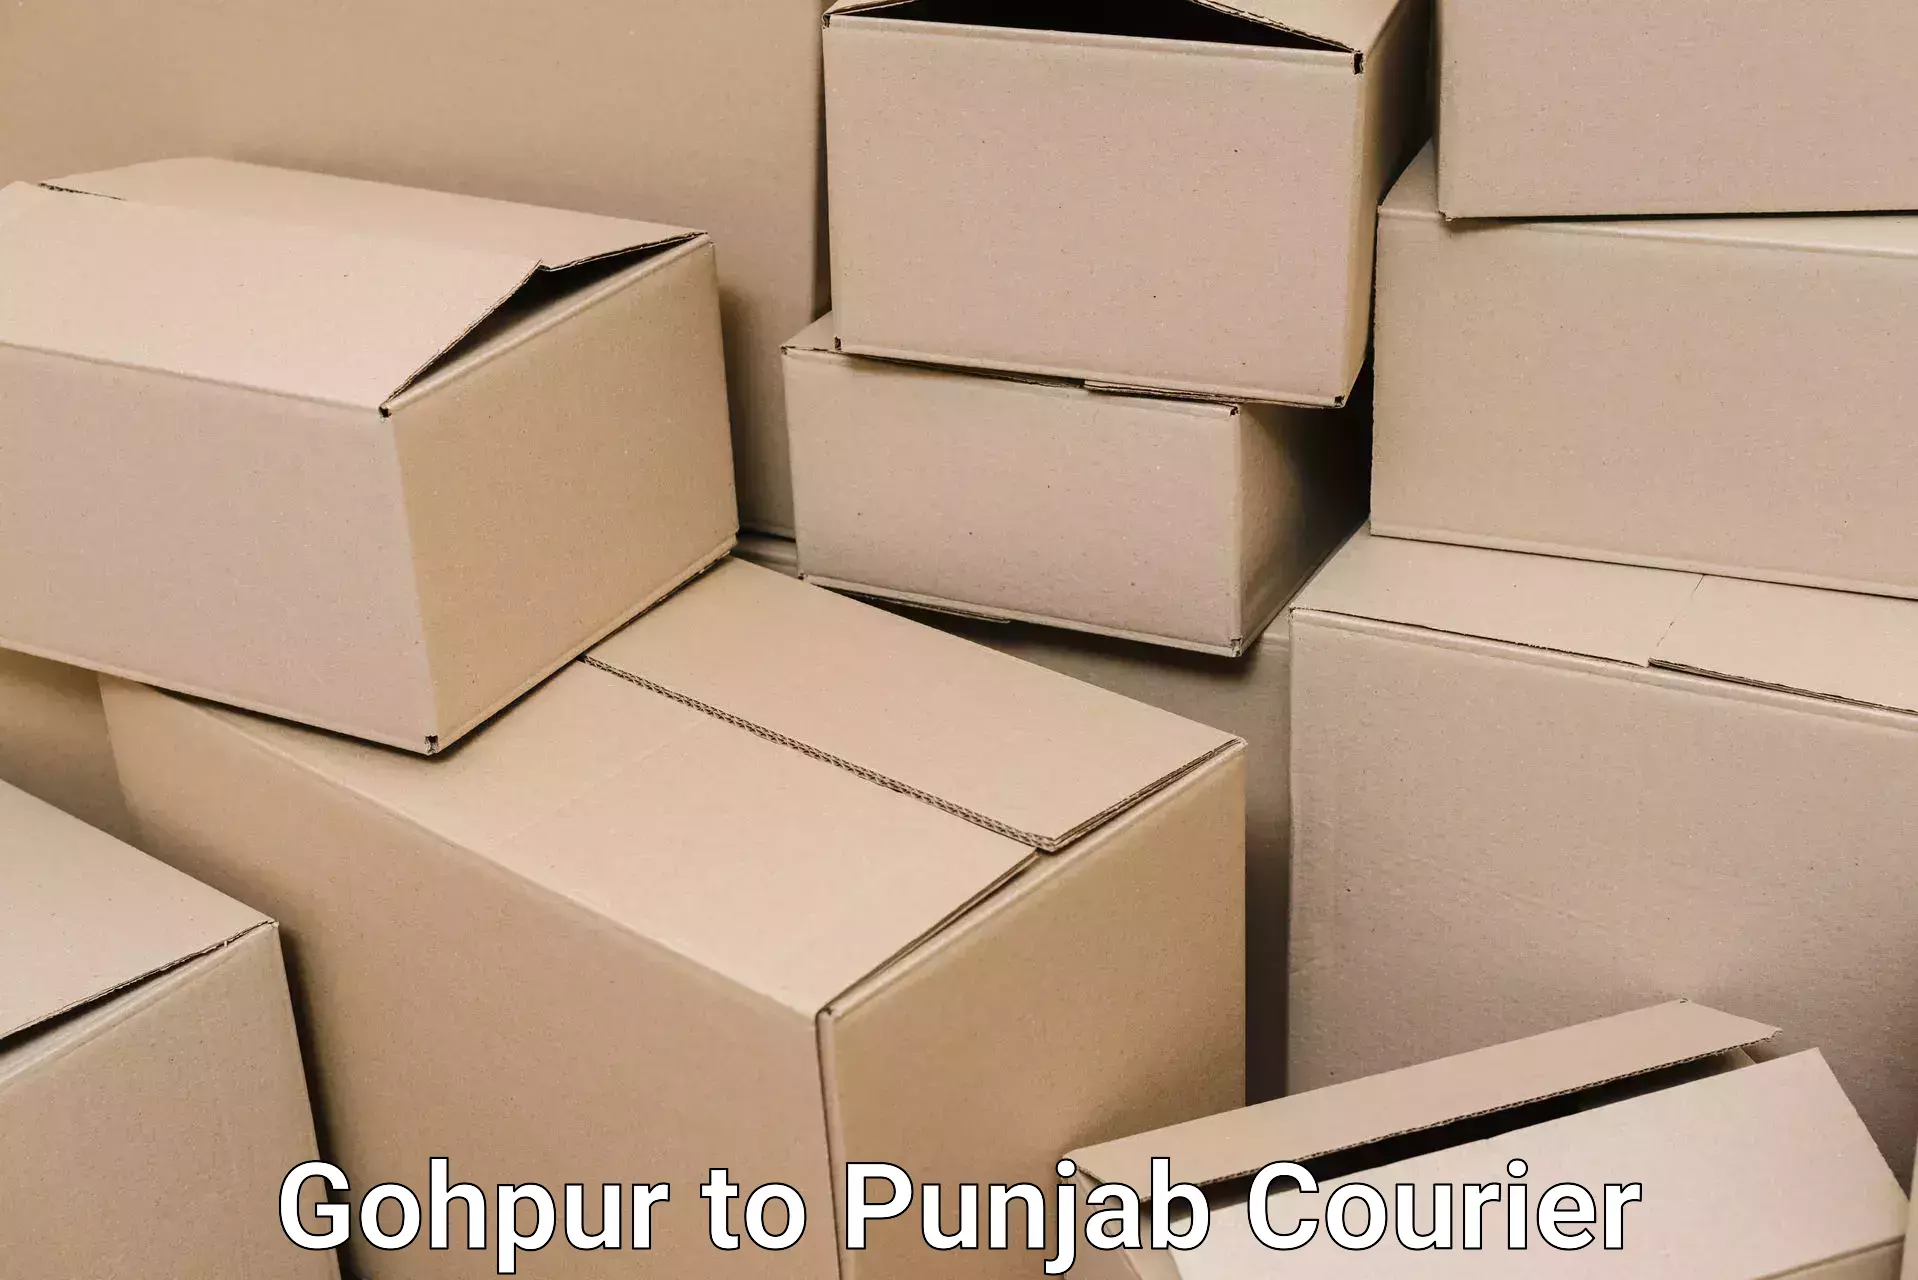 Furniture transport specialists Gohpur to Dhilwan